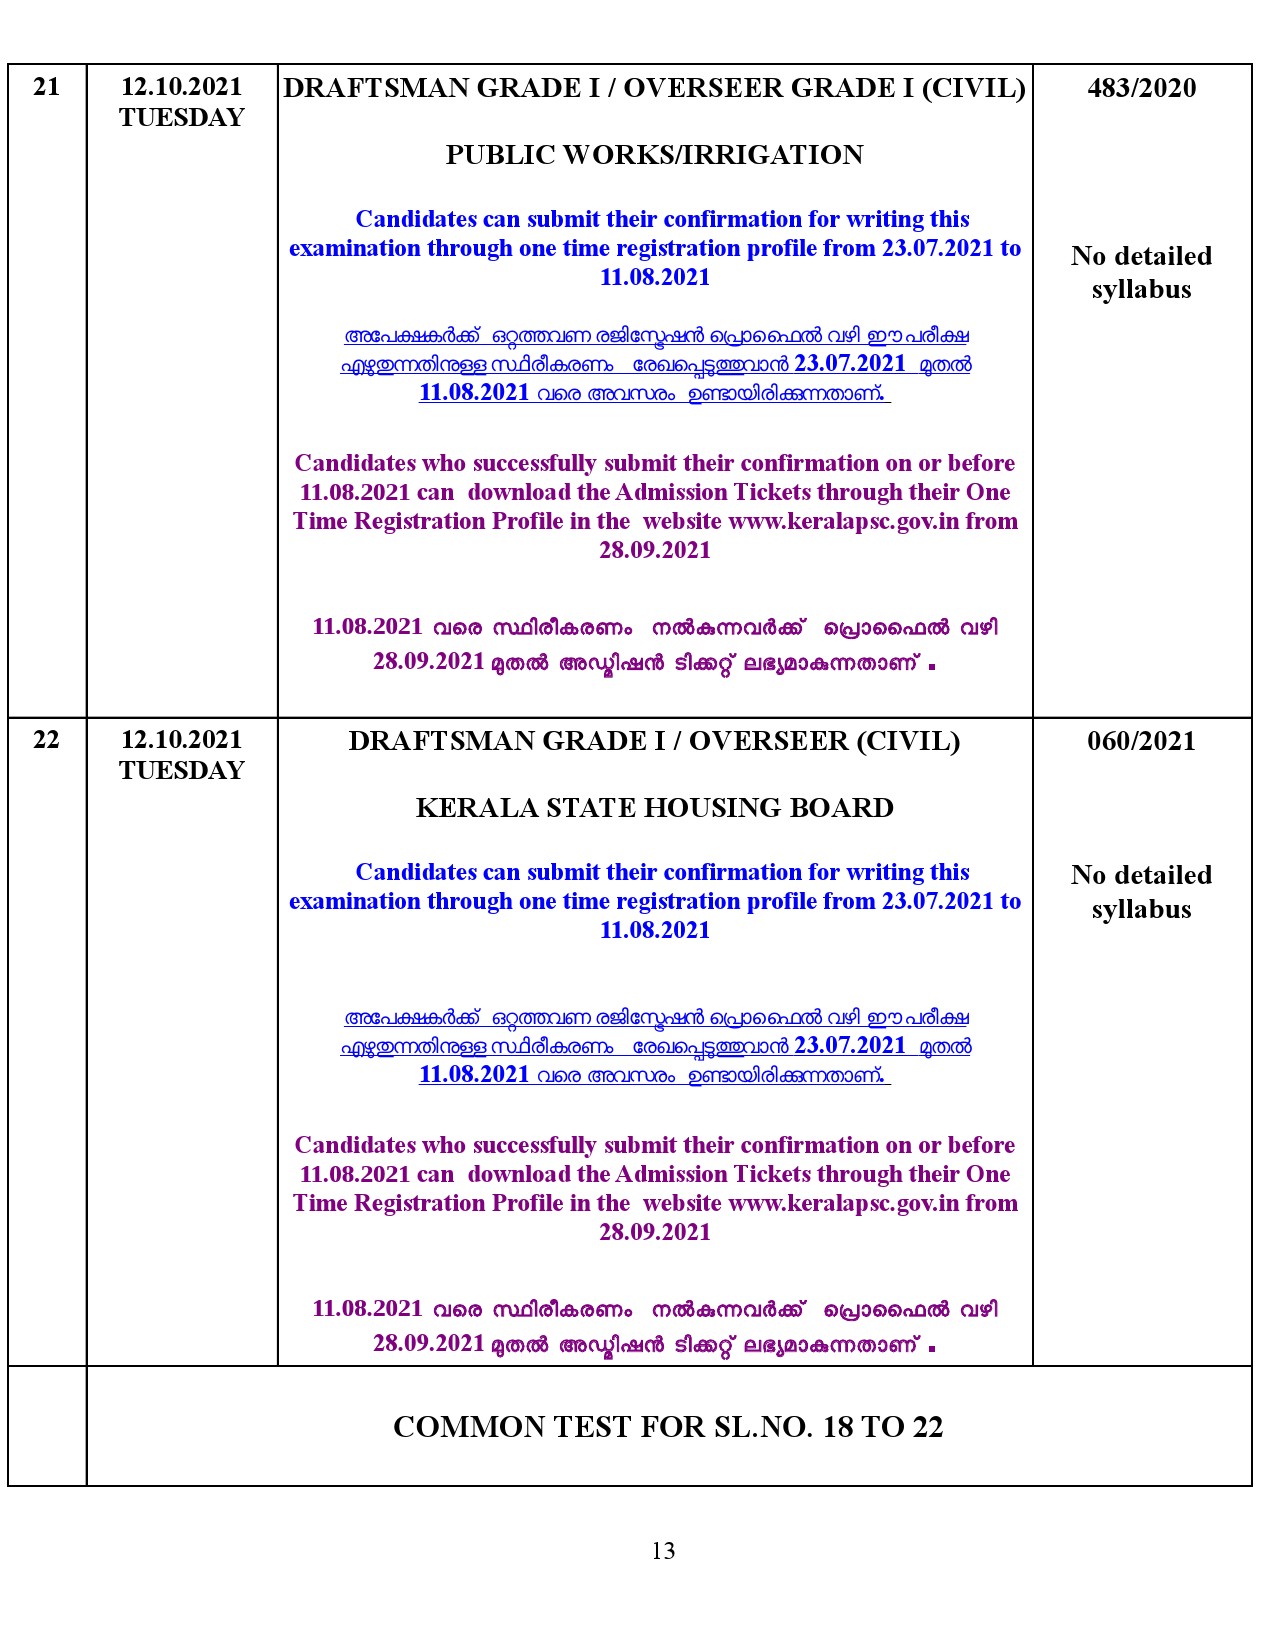 KPSC Examination Programme For The Month Of October 2021 - Notification Image 13